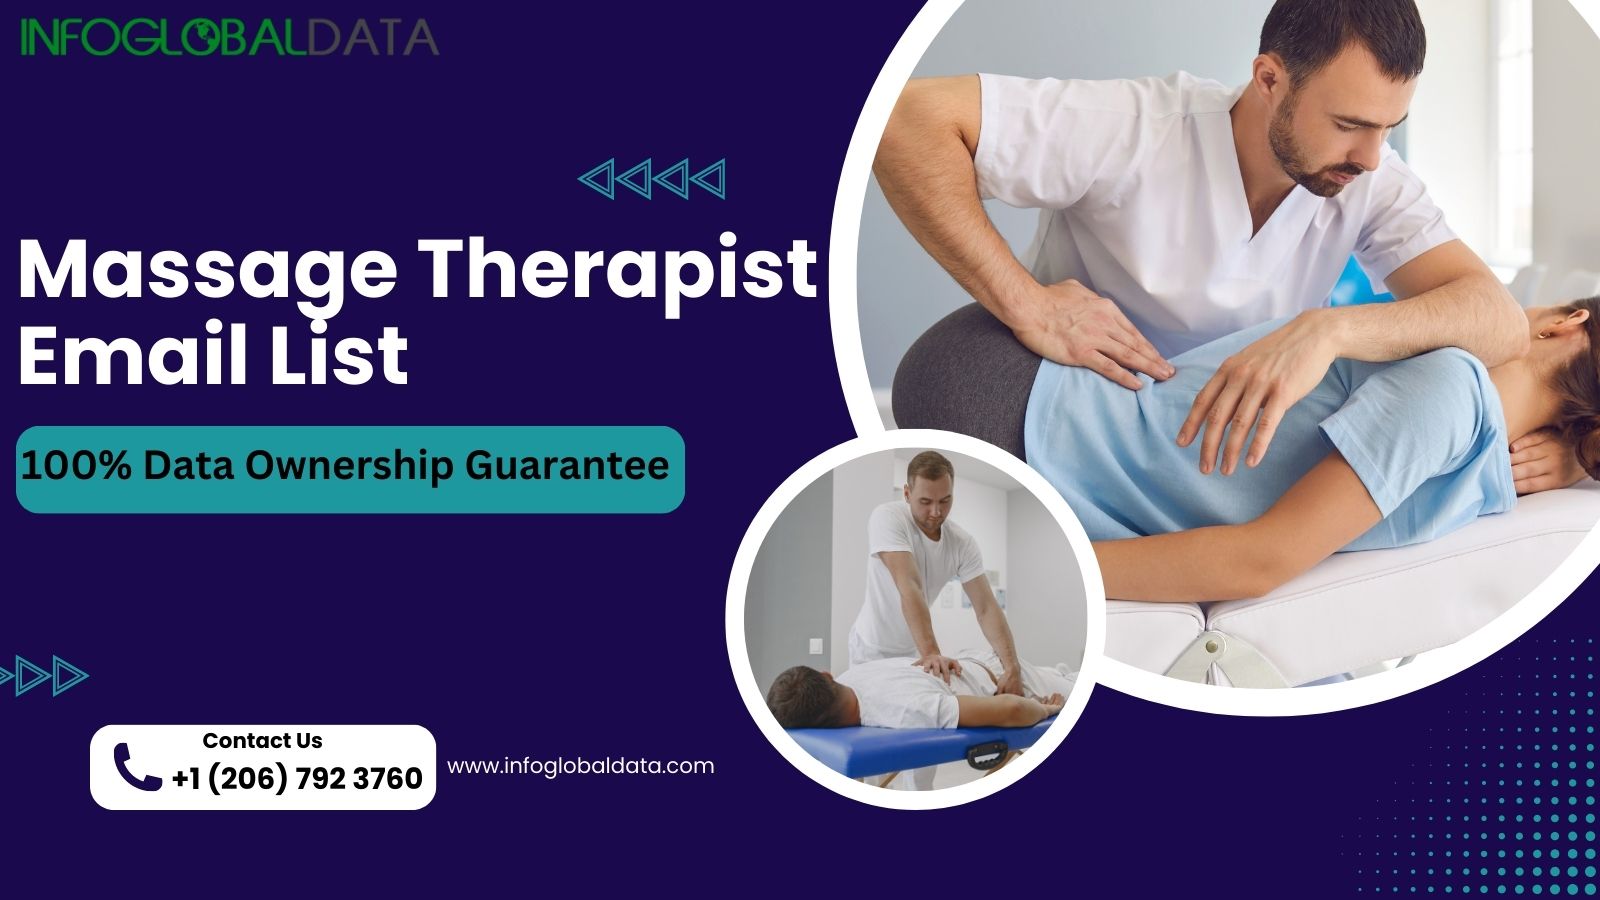 The Ultimate Guide to Marketing to Massage Therapists Email List to Grow Your Business